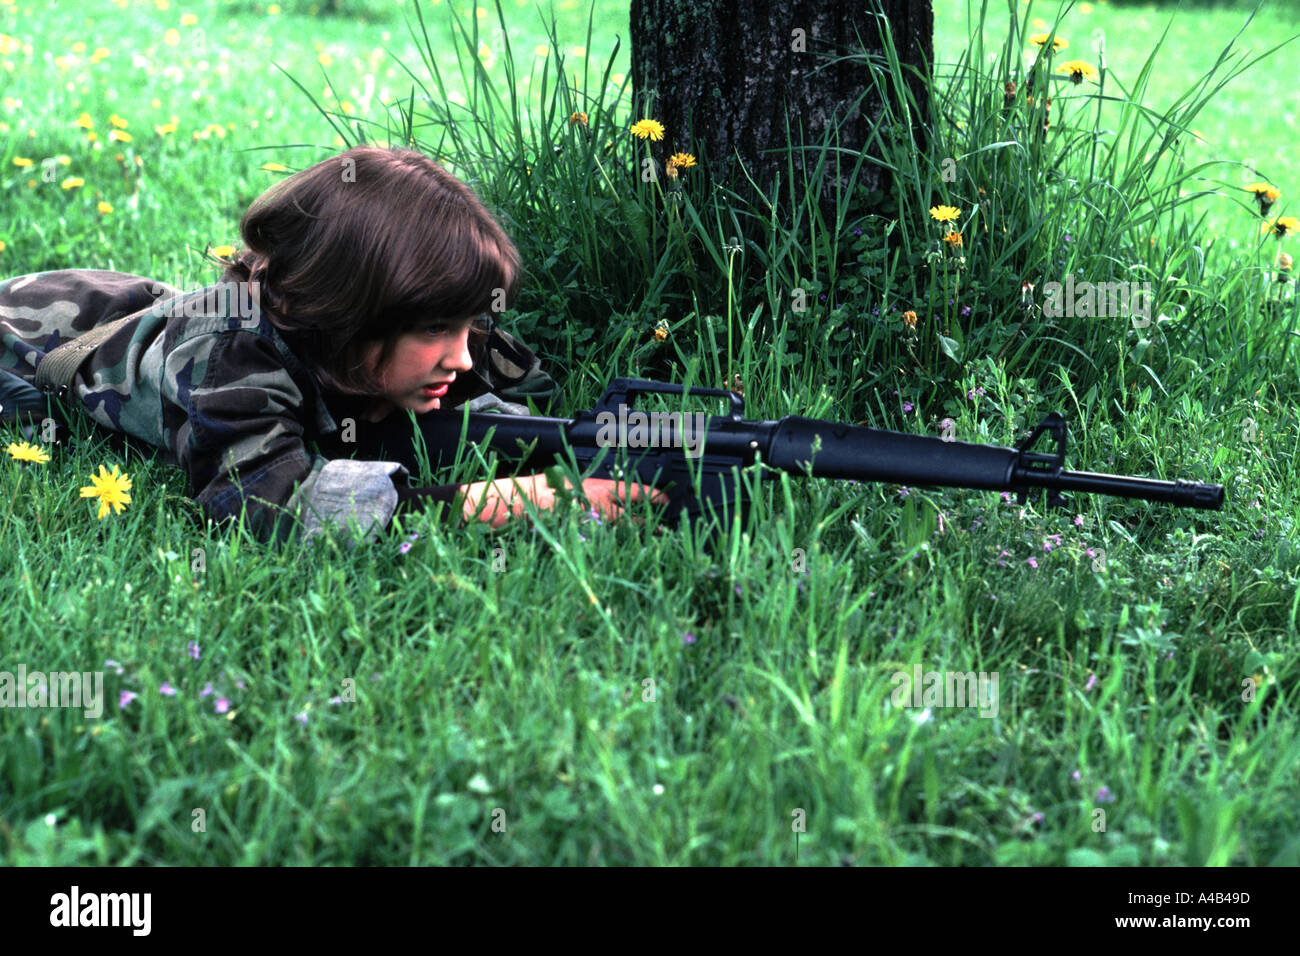 Nine year old girl playing army soldier with toy M16 rifle Stock Photo